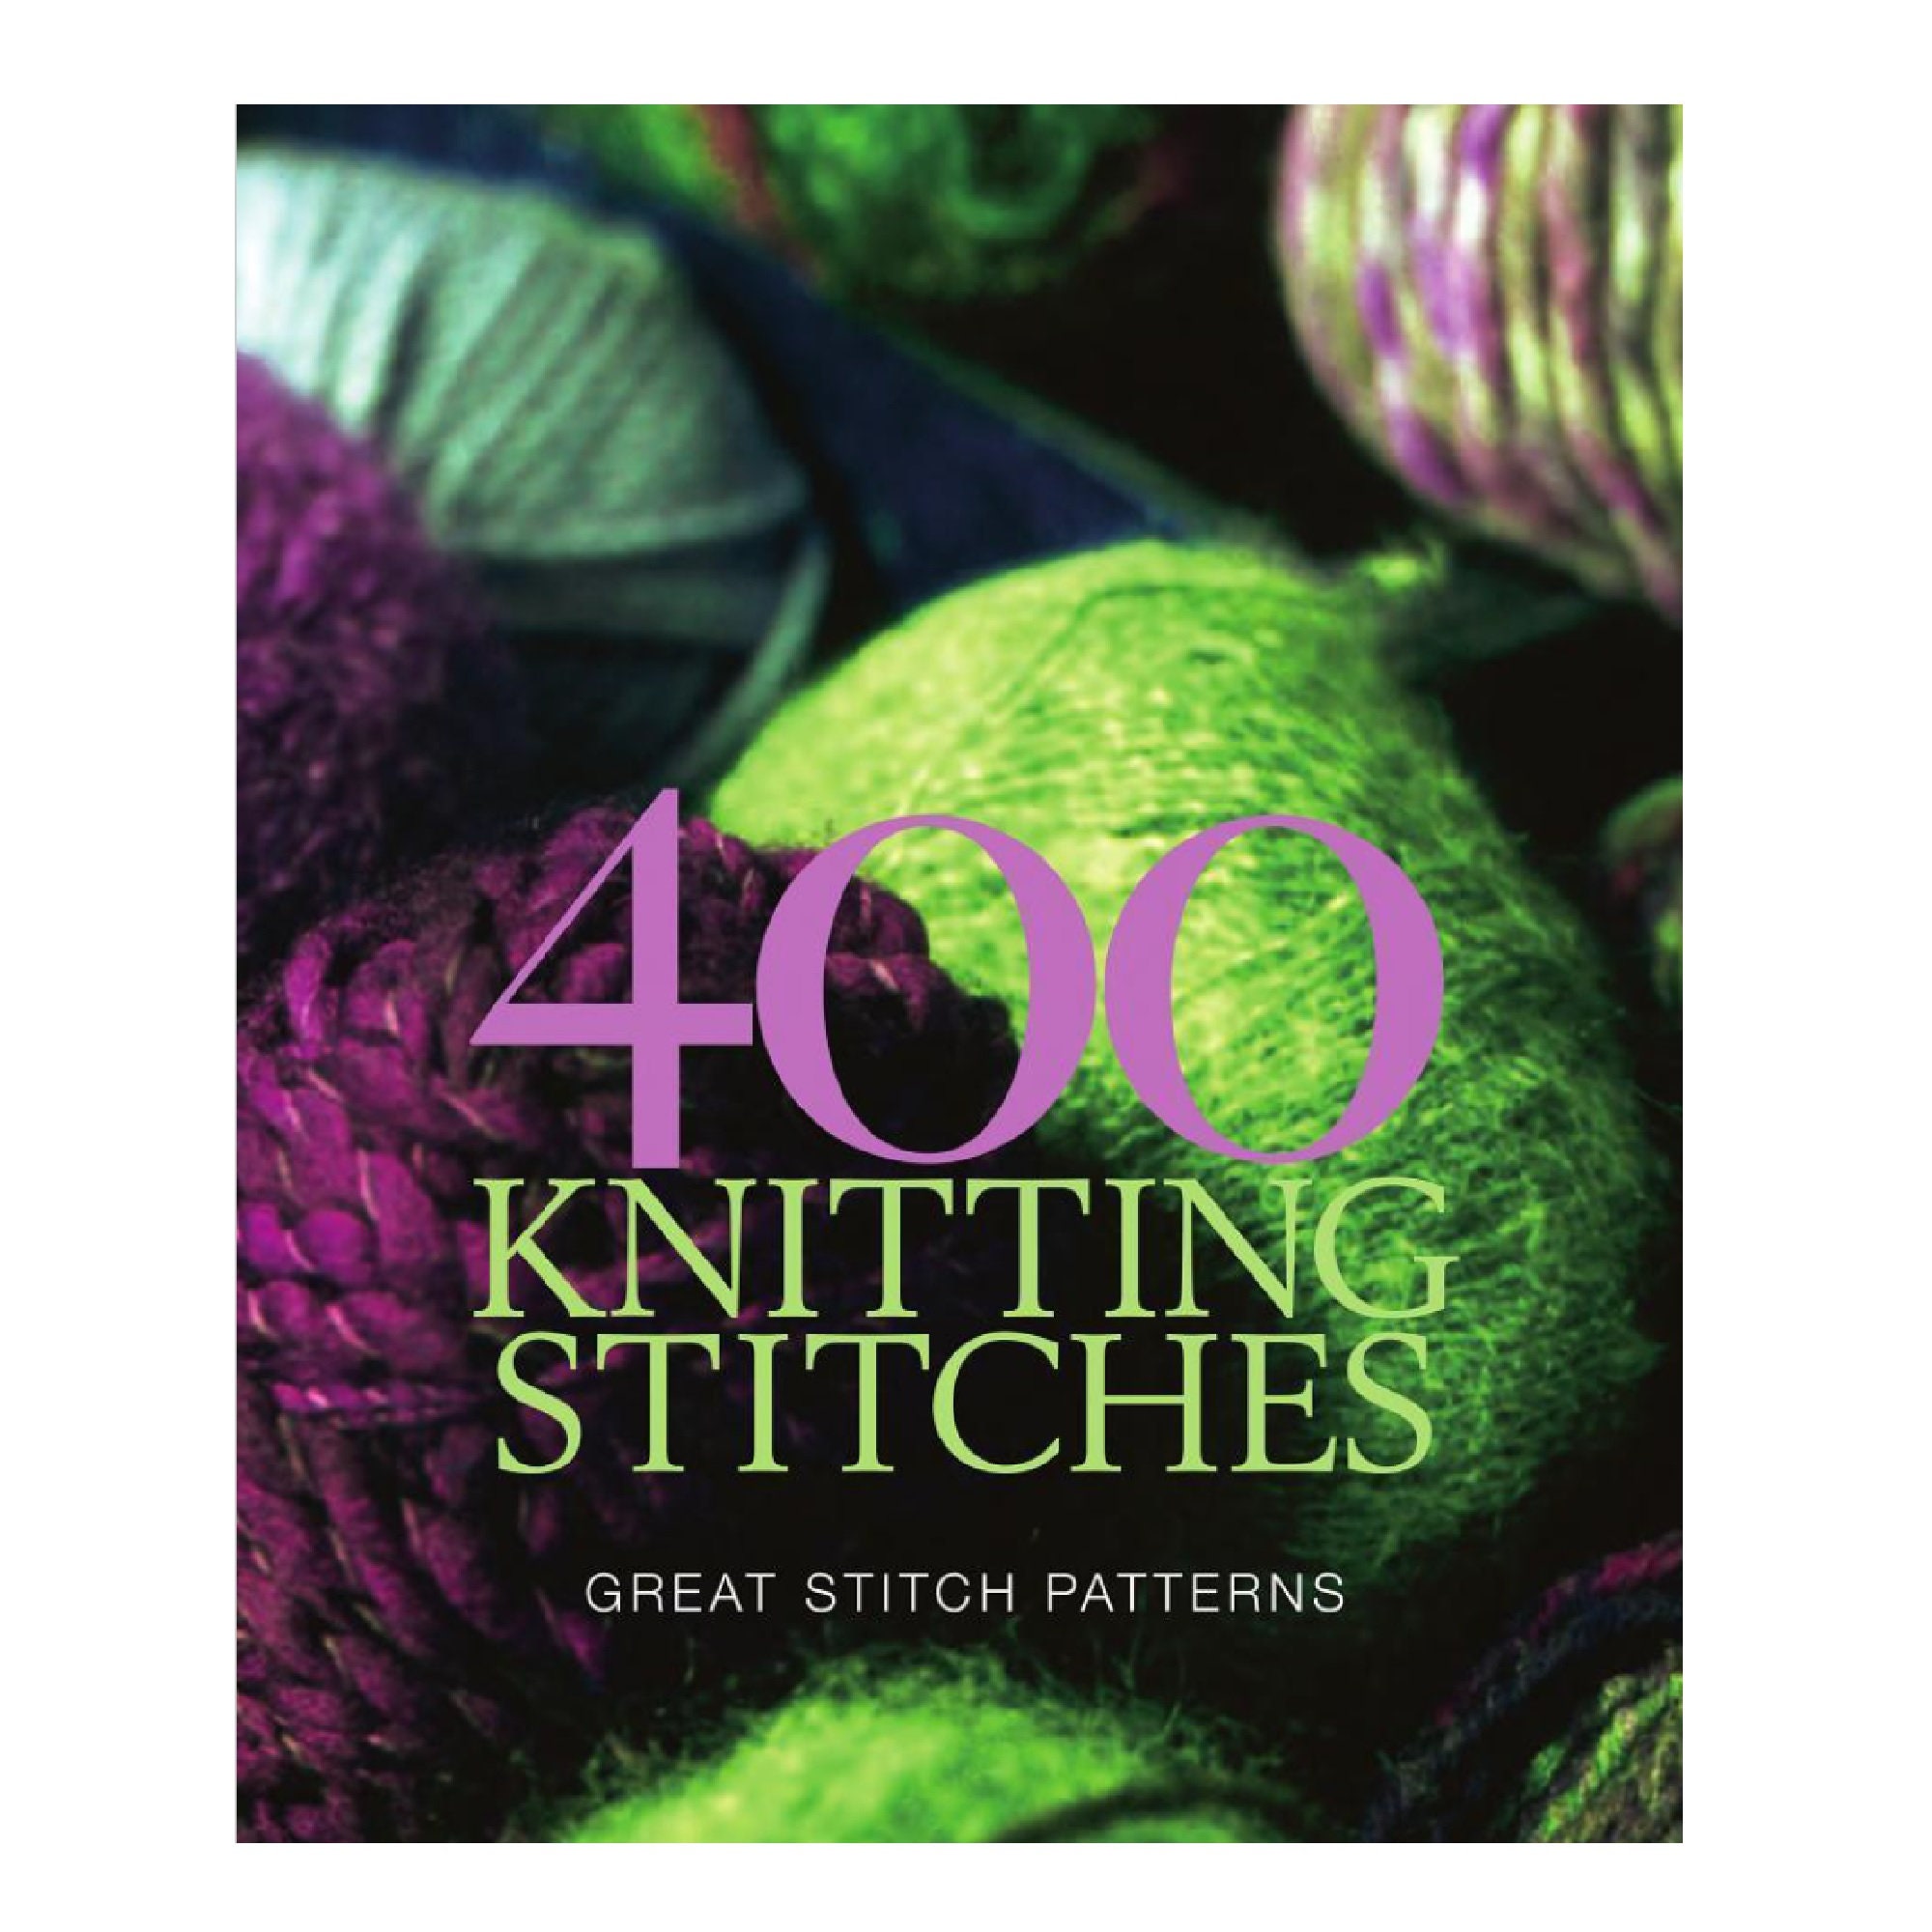 Basic and Advanced Loom Knit Stitch Reference Guide Set 